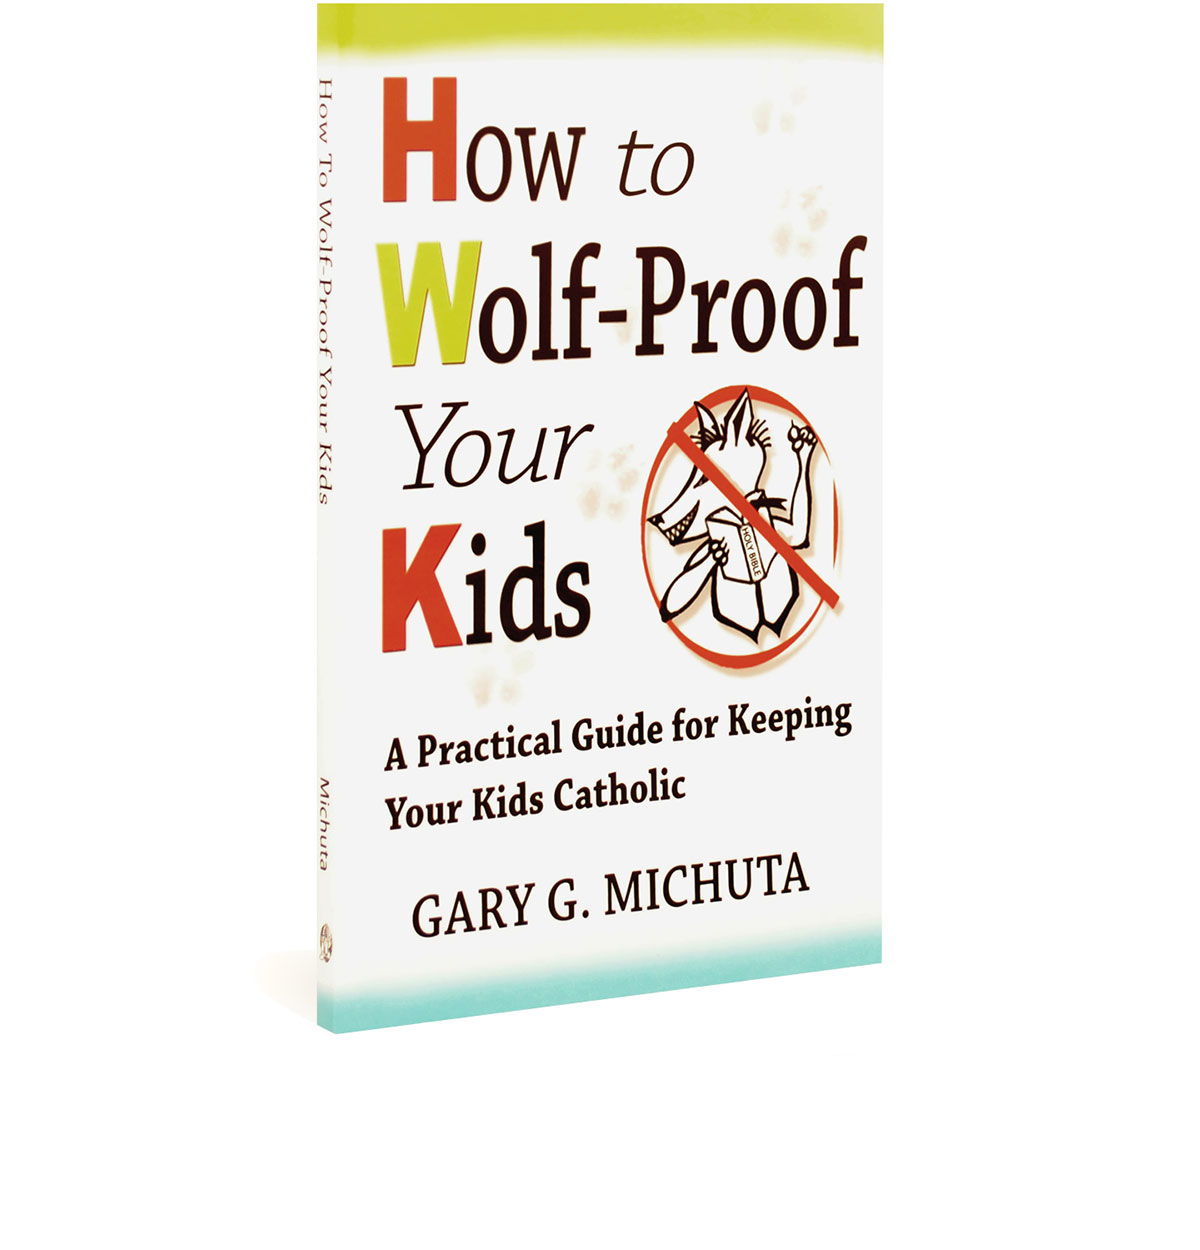 how-to-wolf-proof-your-kids-michuta.jpg